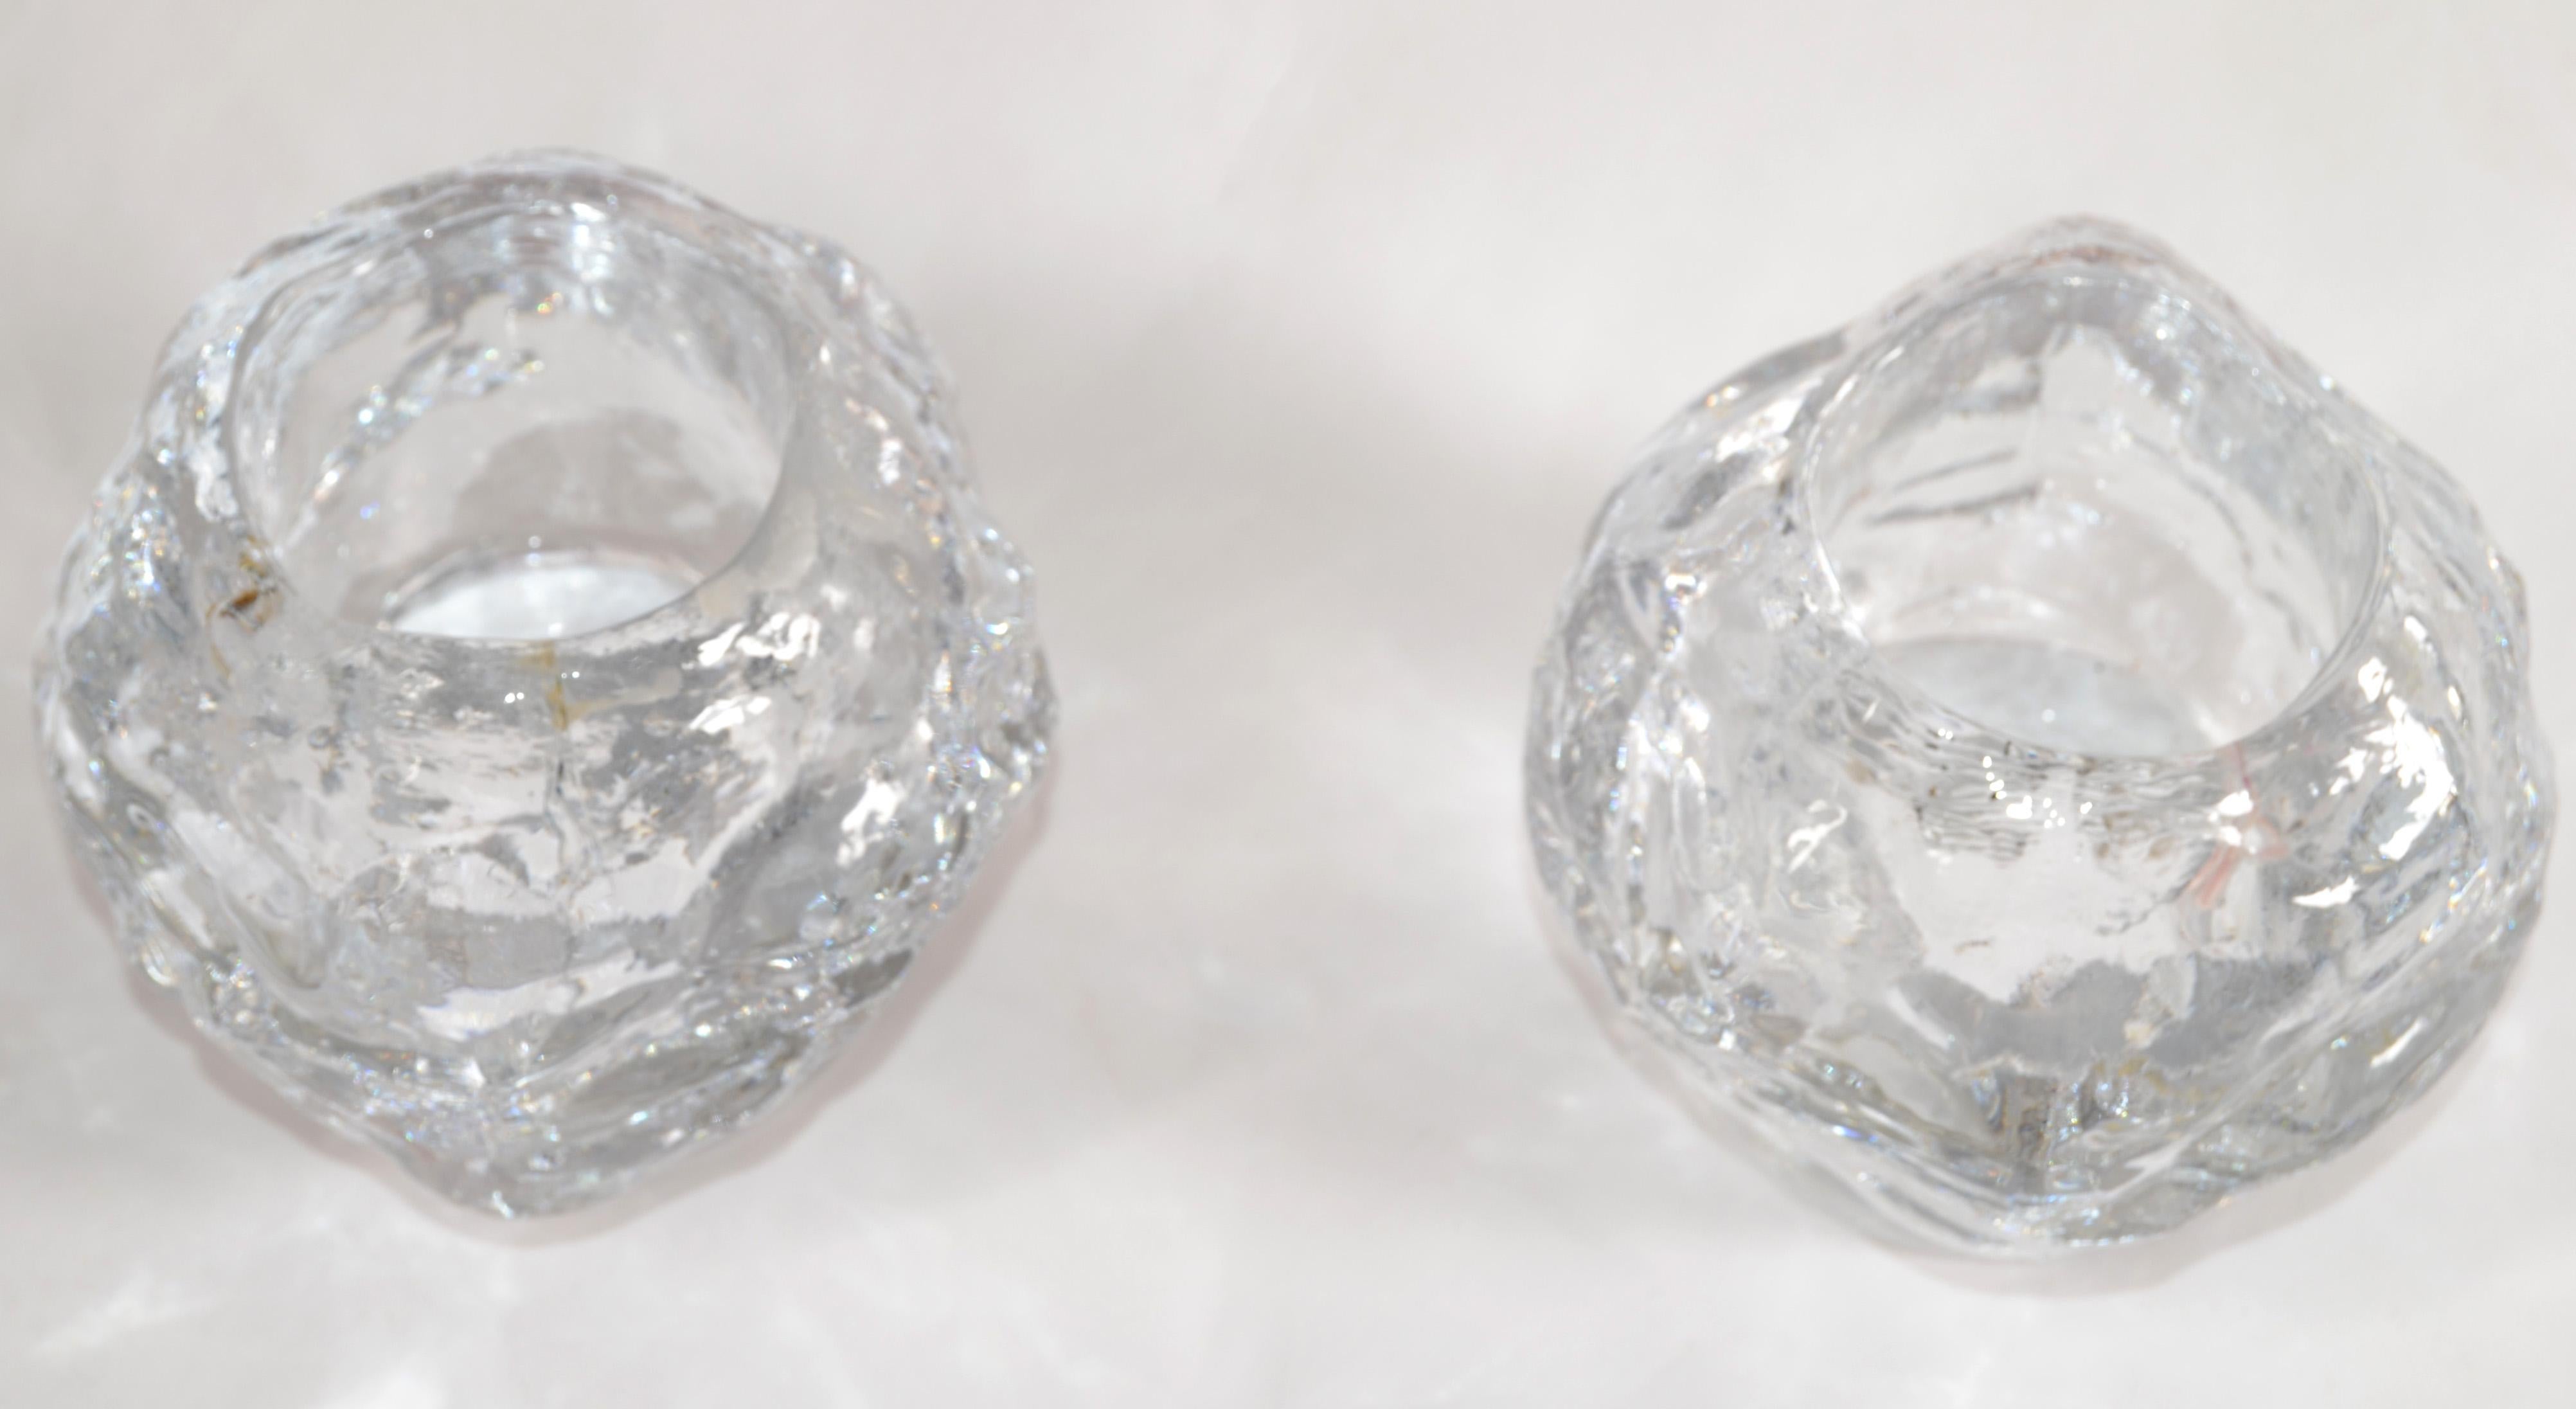 2 Ann Warff Glass Crystal Candle Holders Scandinavian Modern Kosta Boda Style In Good Condition For Sale In Miami, FL